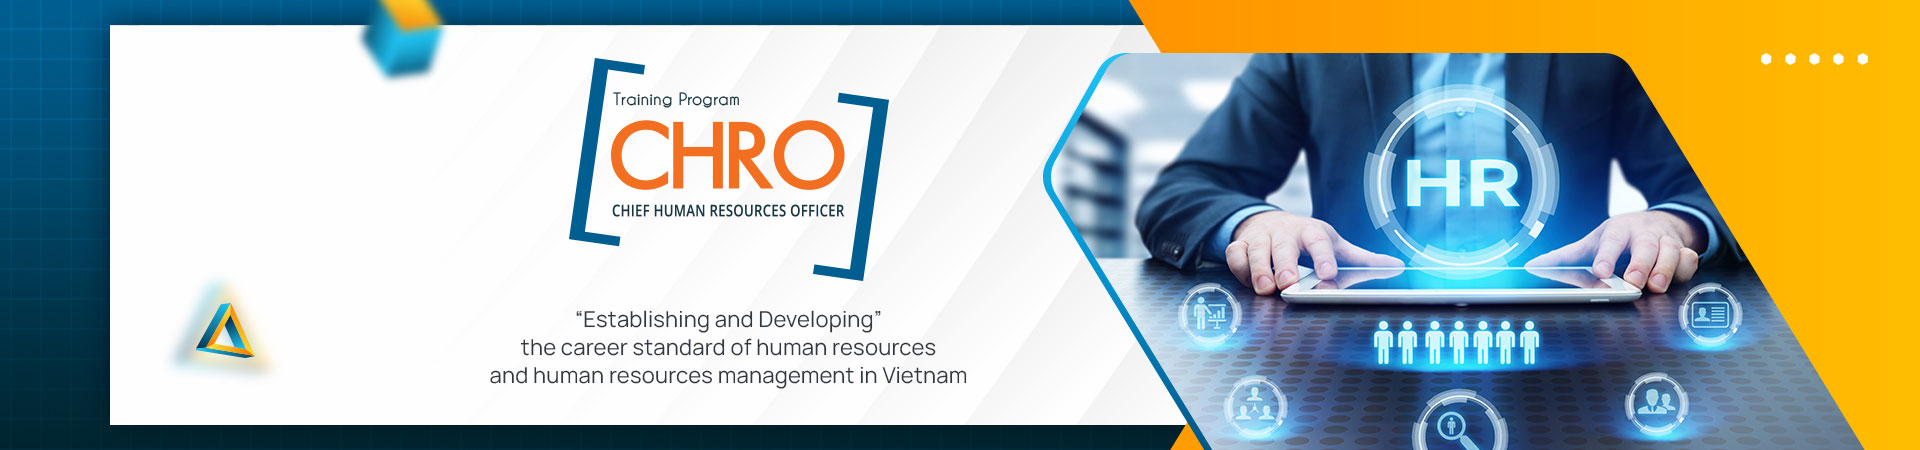 CHRO - Chief Human Resources Officer